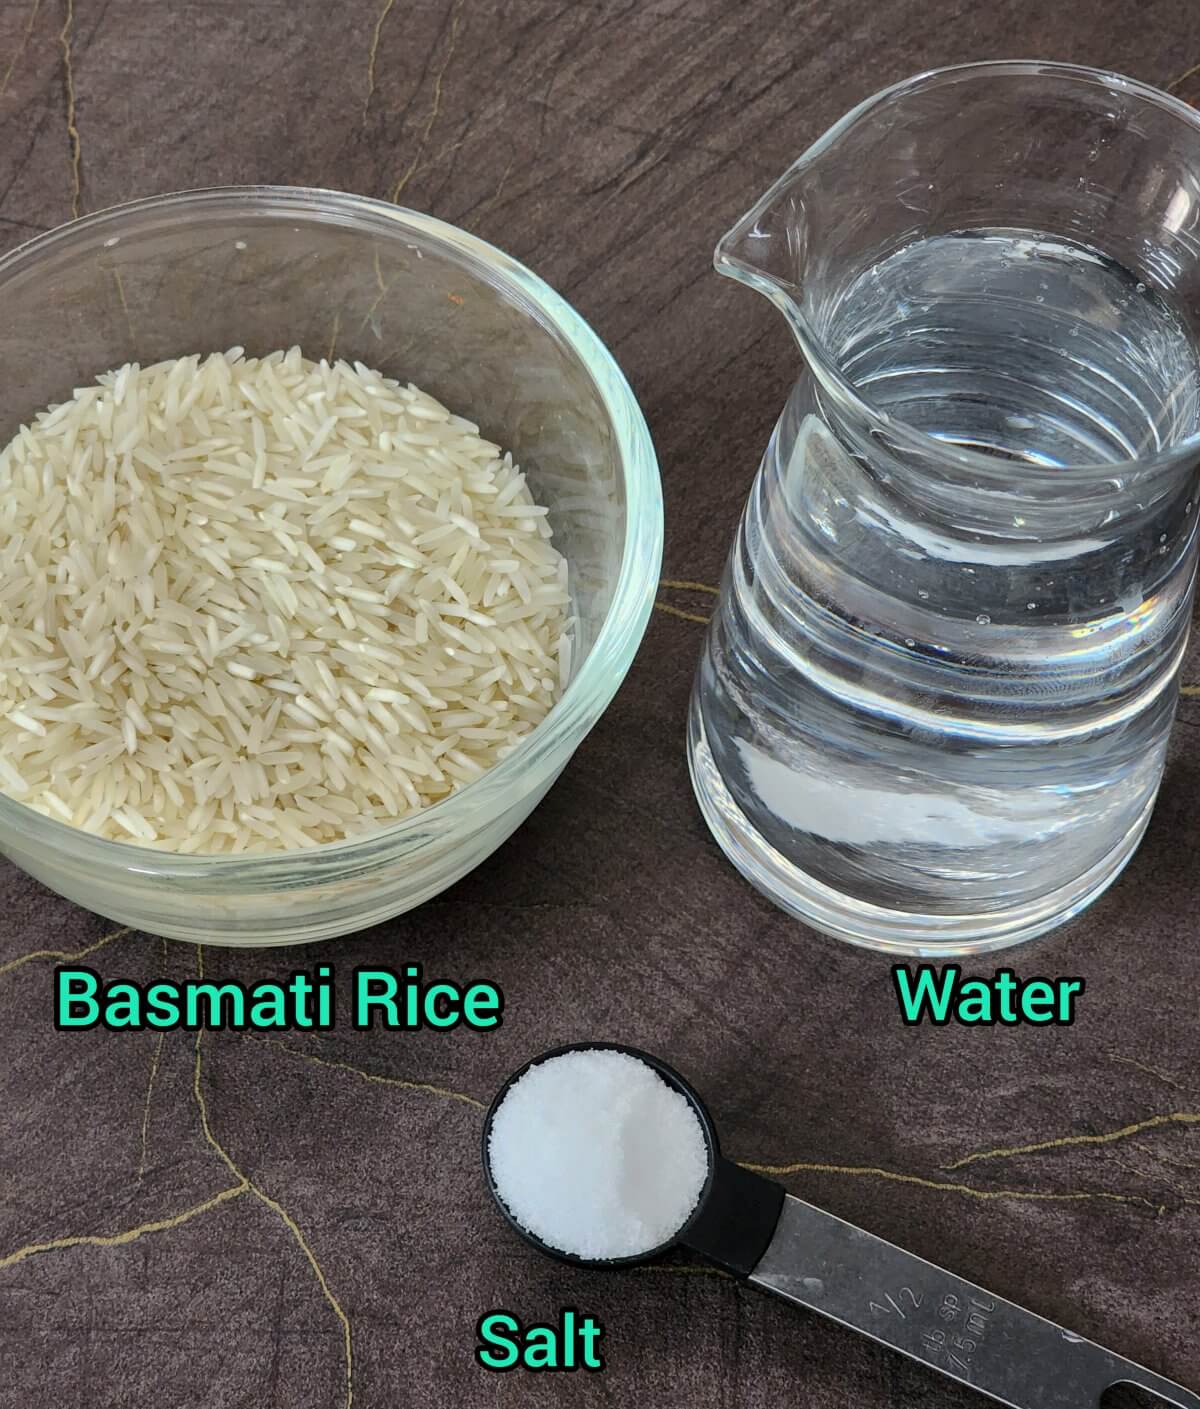 Rice in a glass bowl, water in glass jug, and salt in a spoon measure.